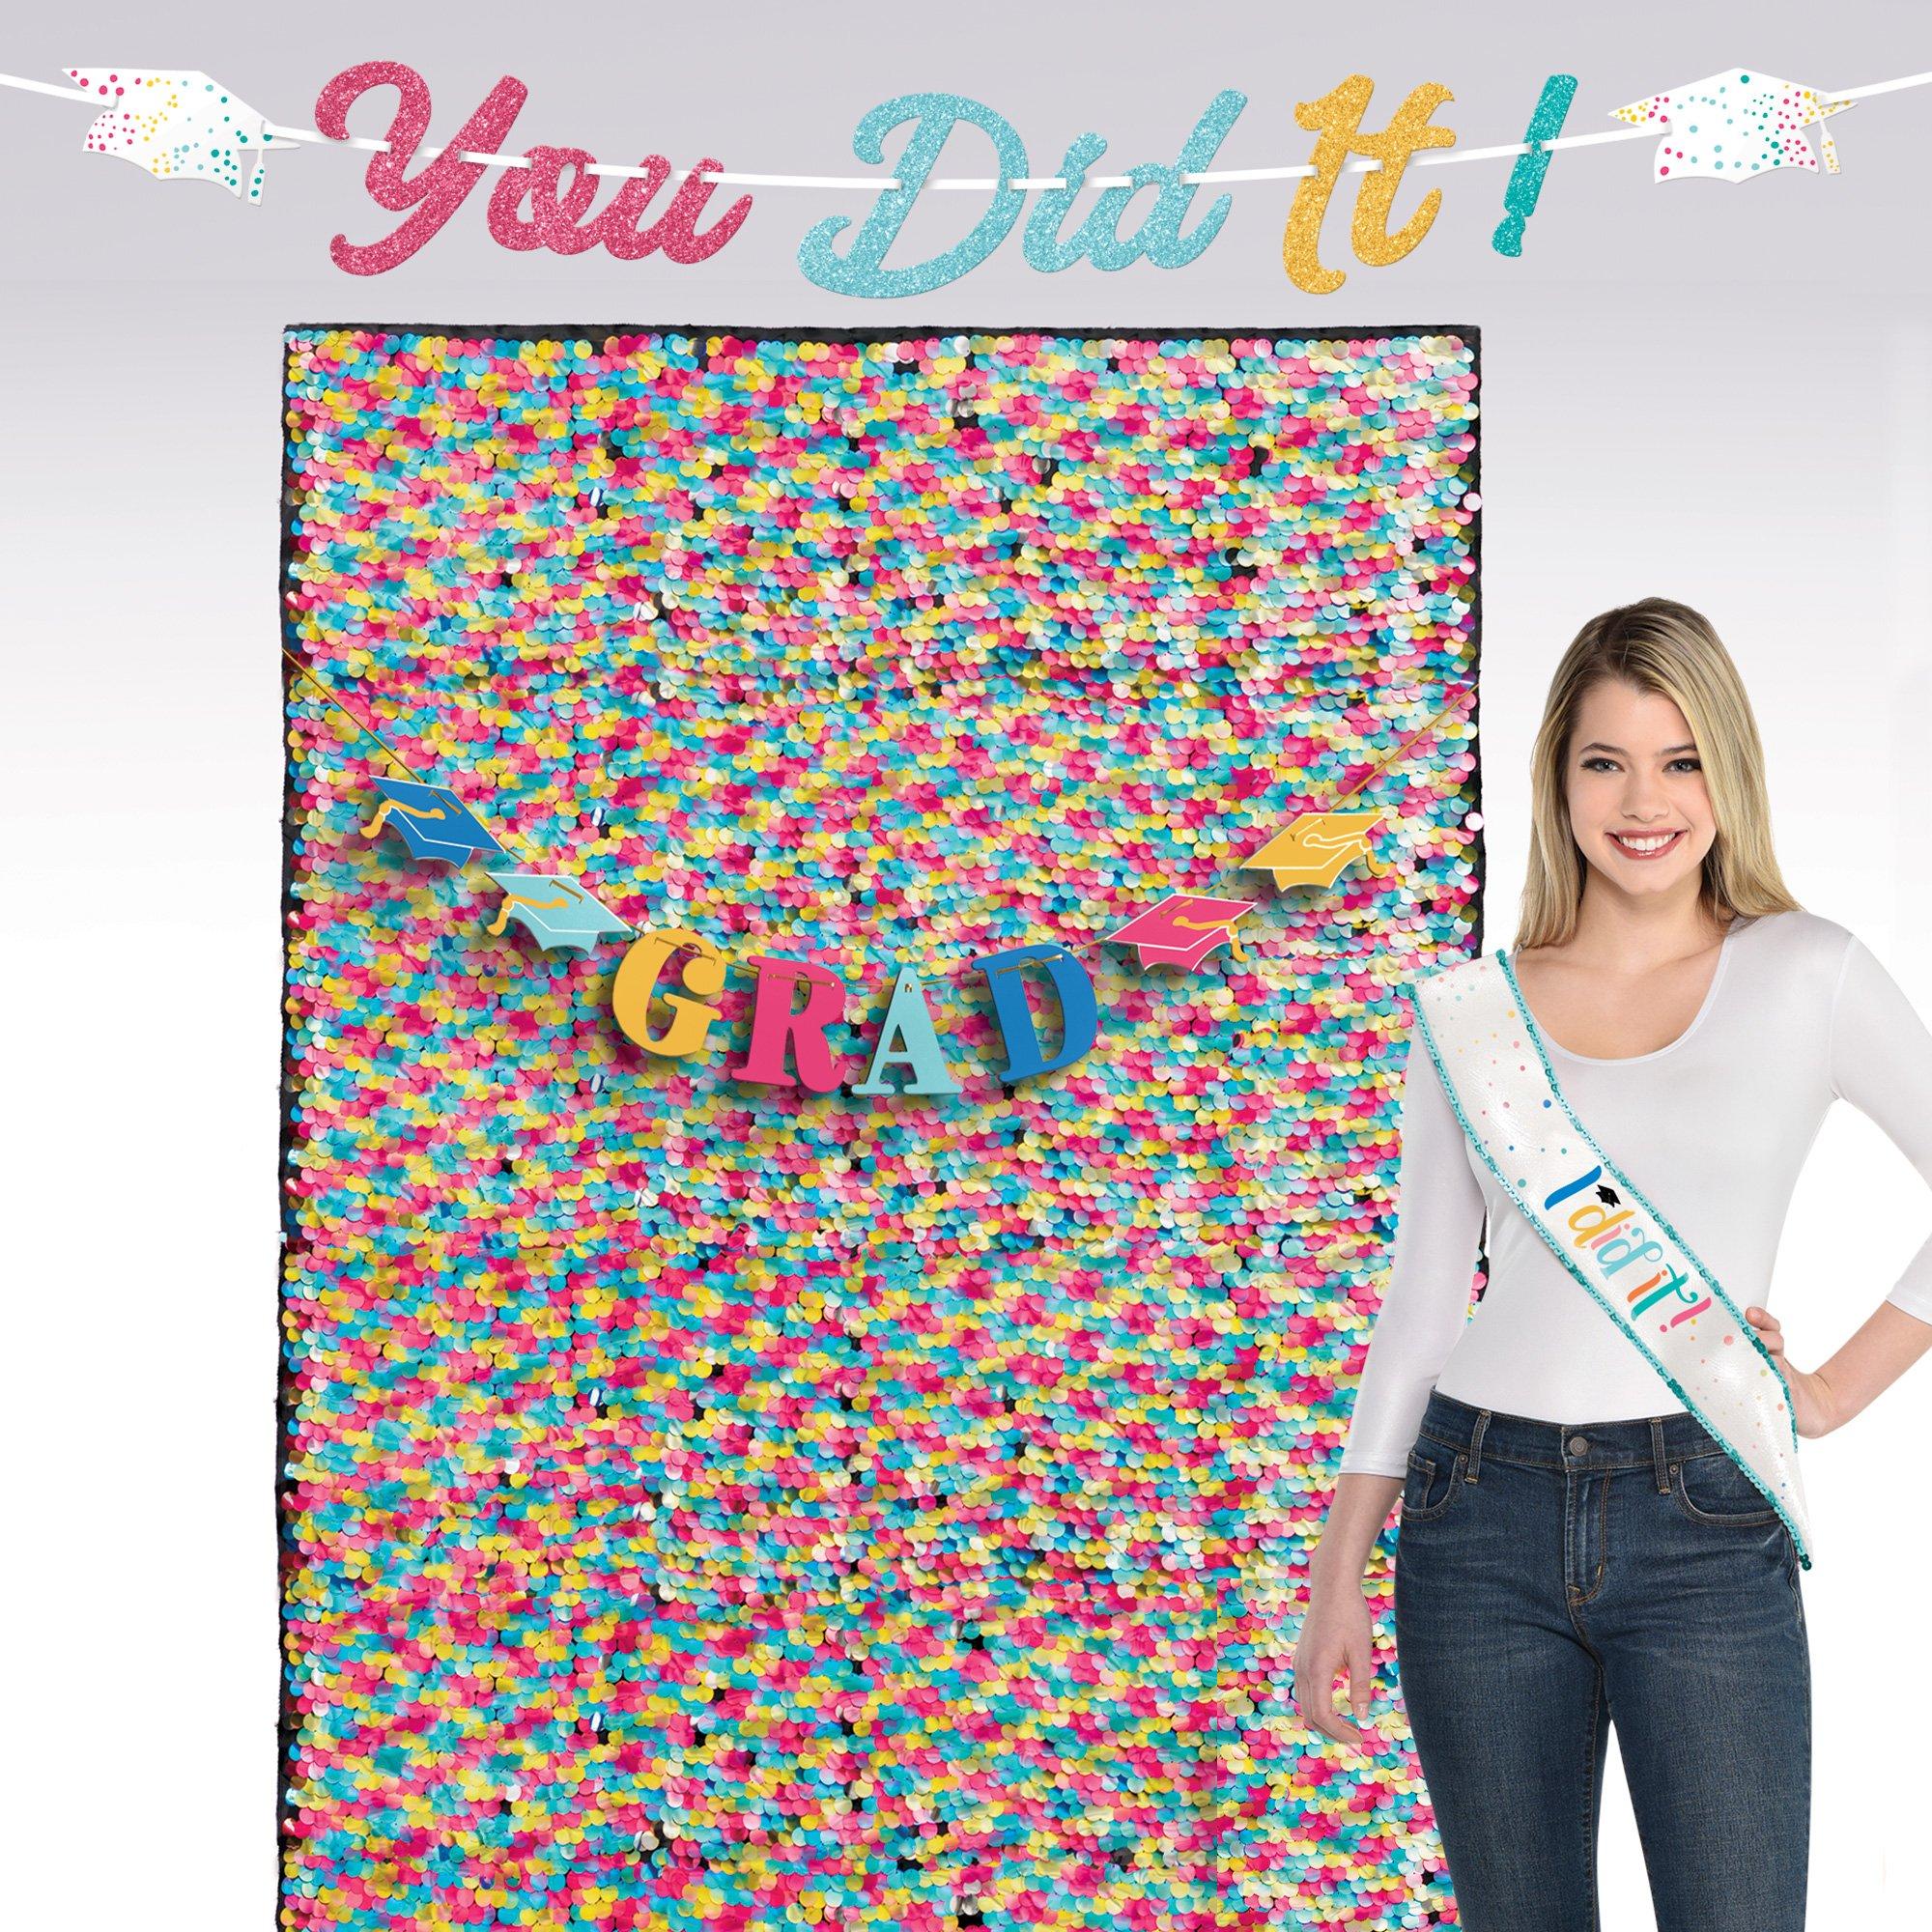 Graduation Party Photo Booth Kit with Decorations, Backdrops - Follow Your Dreams 2024